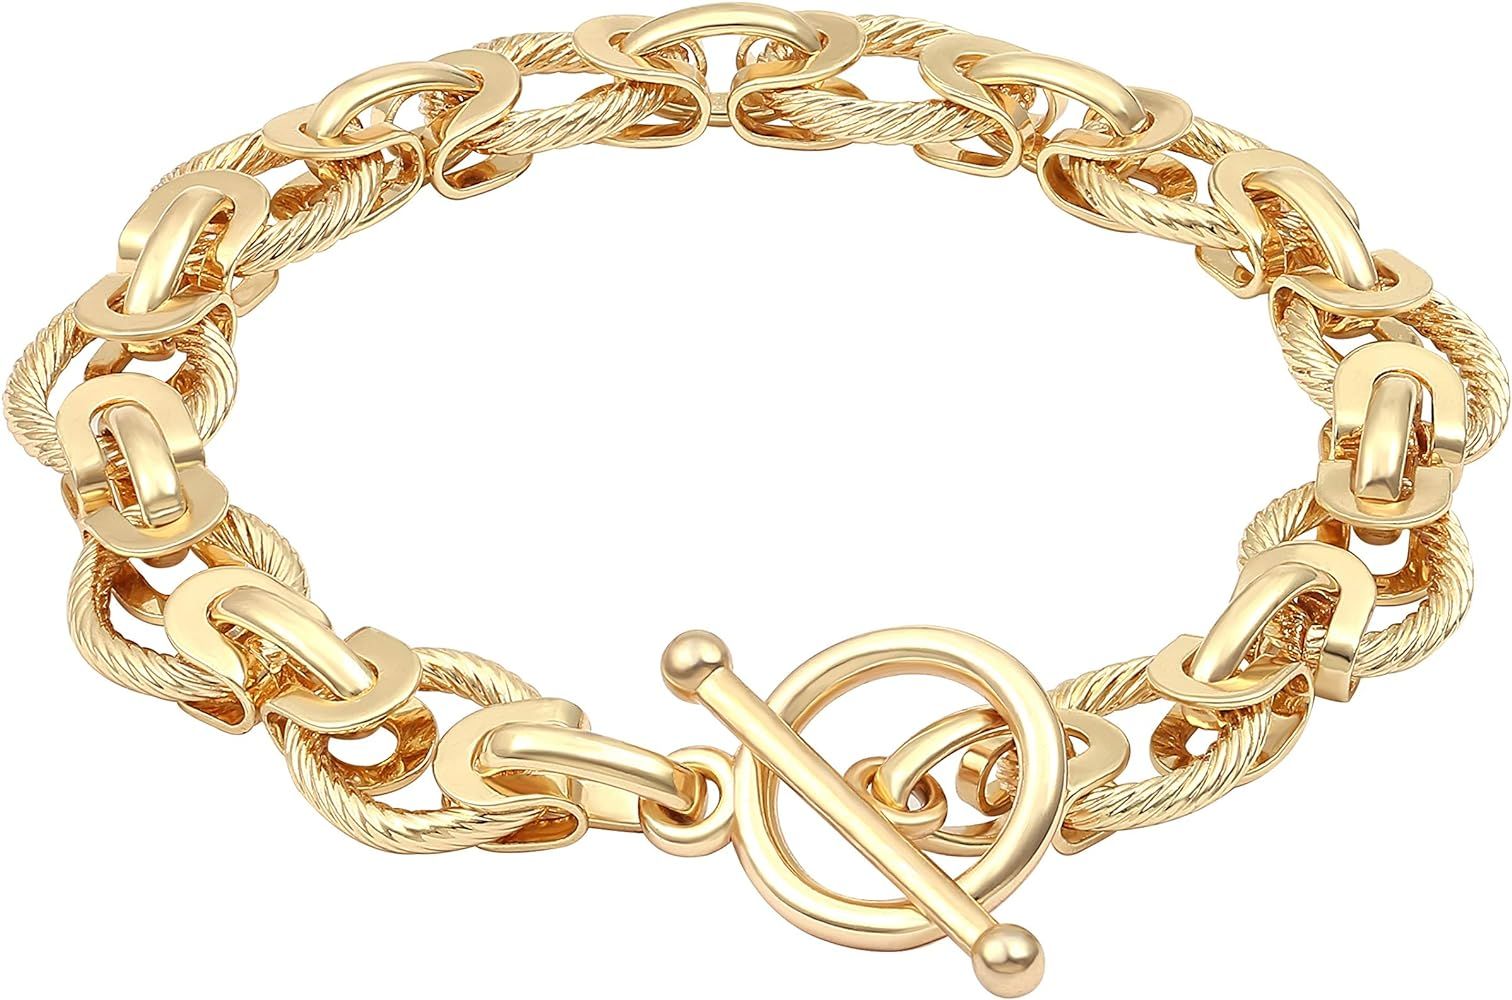 SOFYBJA 18k Gold Plated Personalized Chunky Cuban Oval Link Chain Bracelets for Men Women Toggle Rop | Amazon (US)